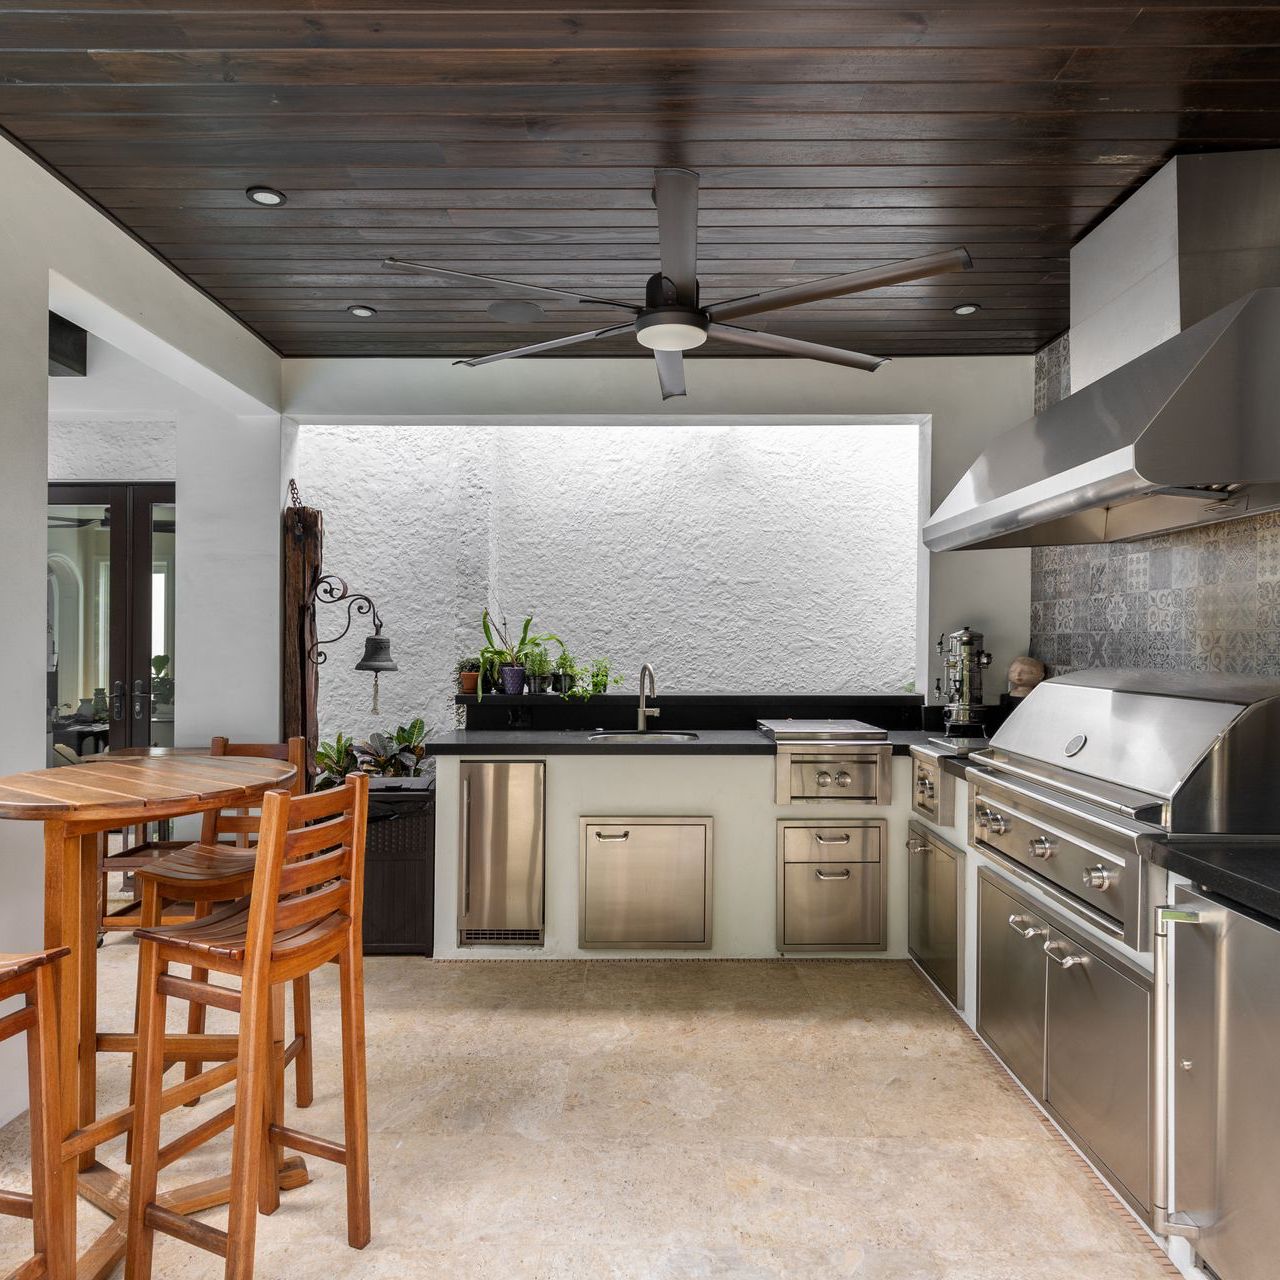 Modern outdoor kitchen and. luxury with grill, stove, extractor hood, wooden ceiling with fan, wooden tables and benches, chop tap, tiled wall.